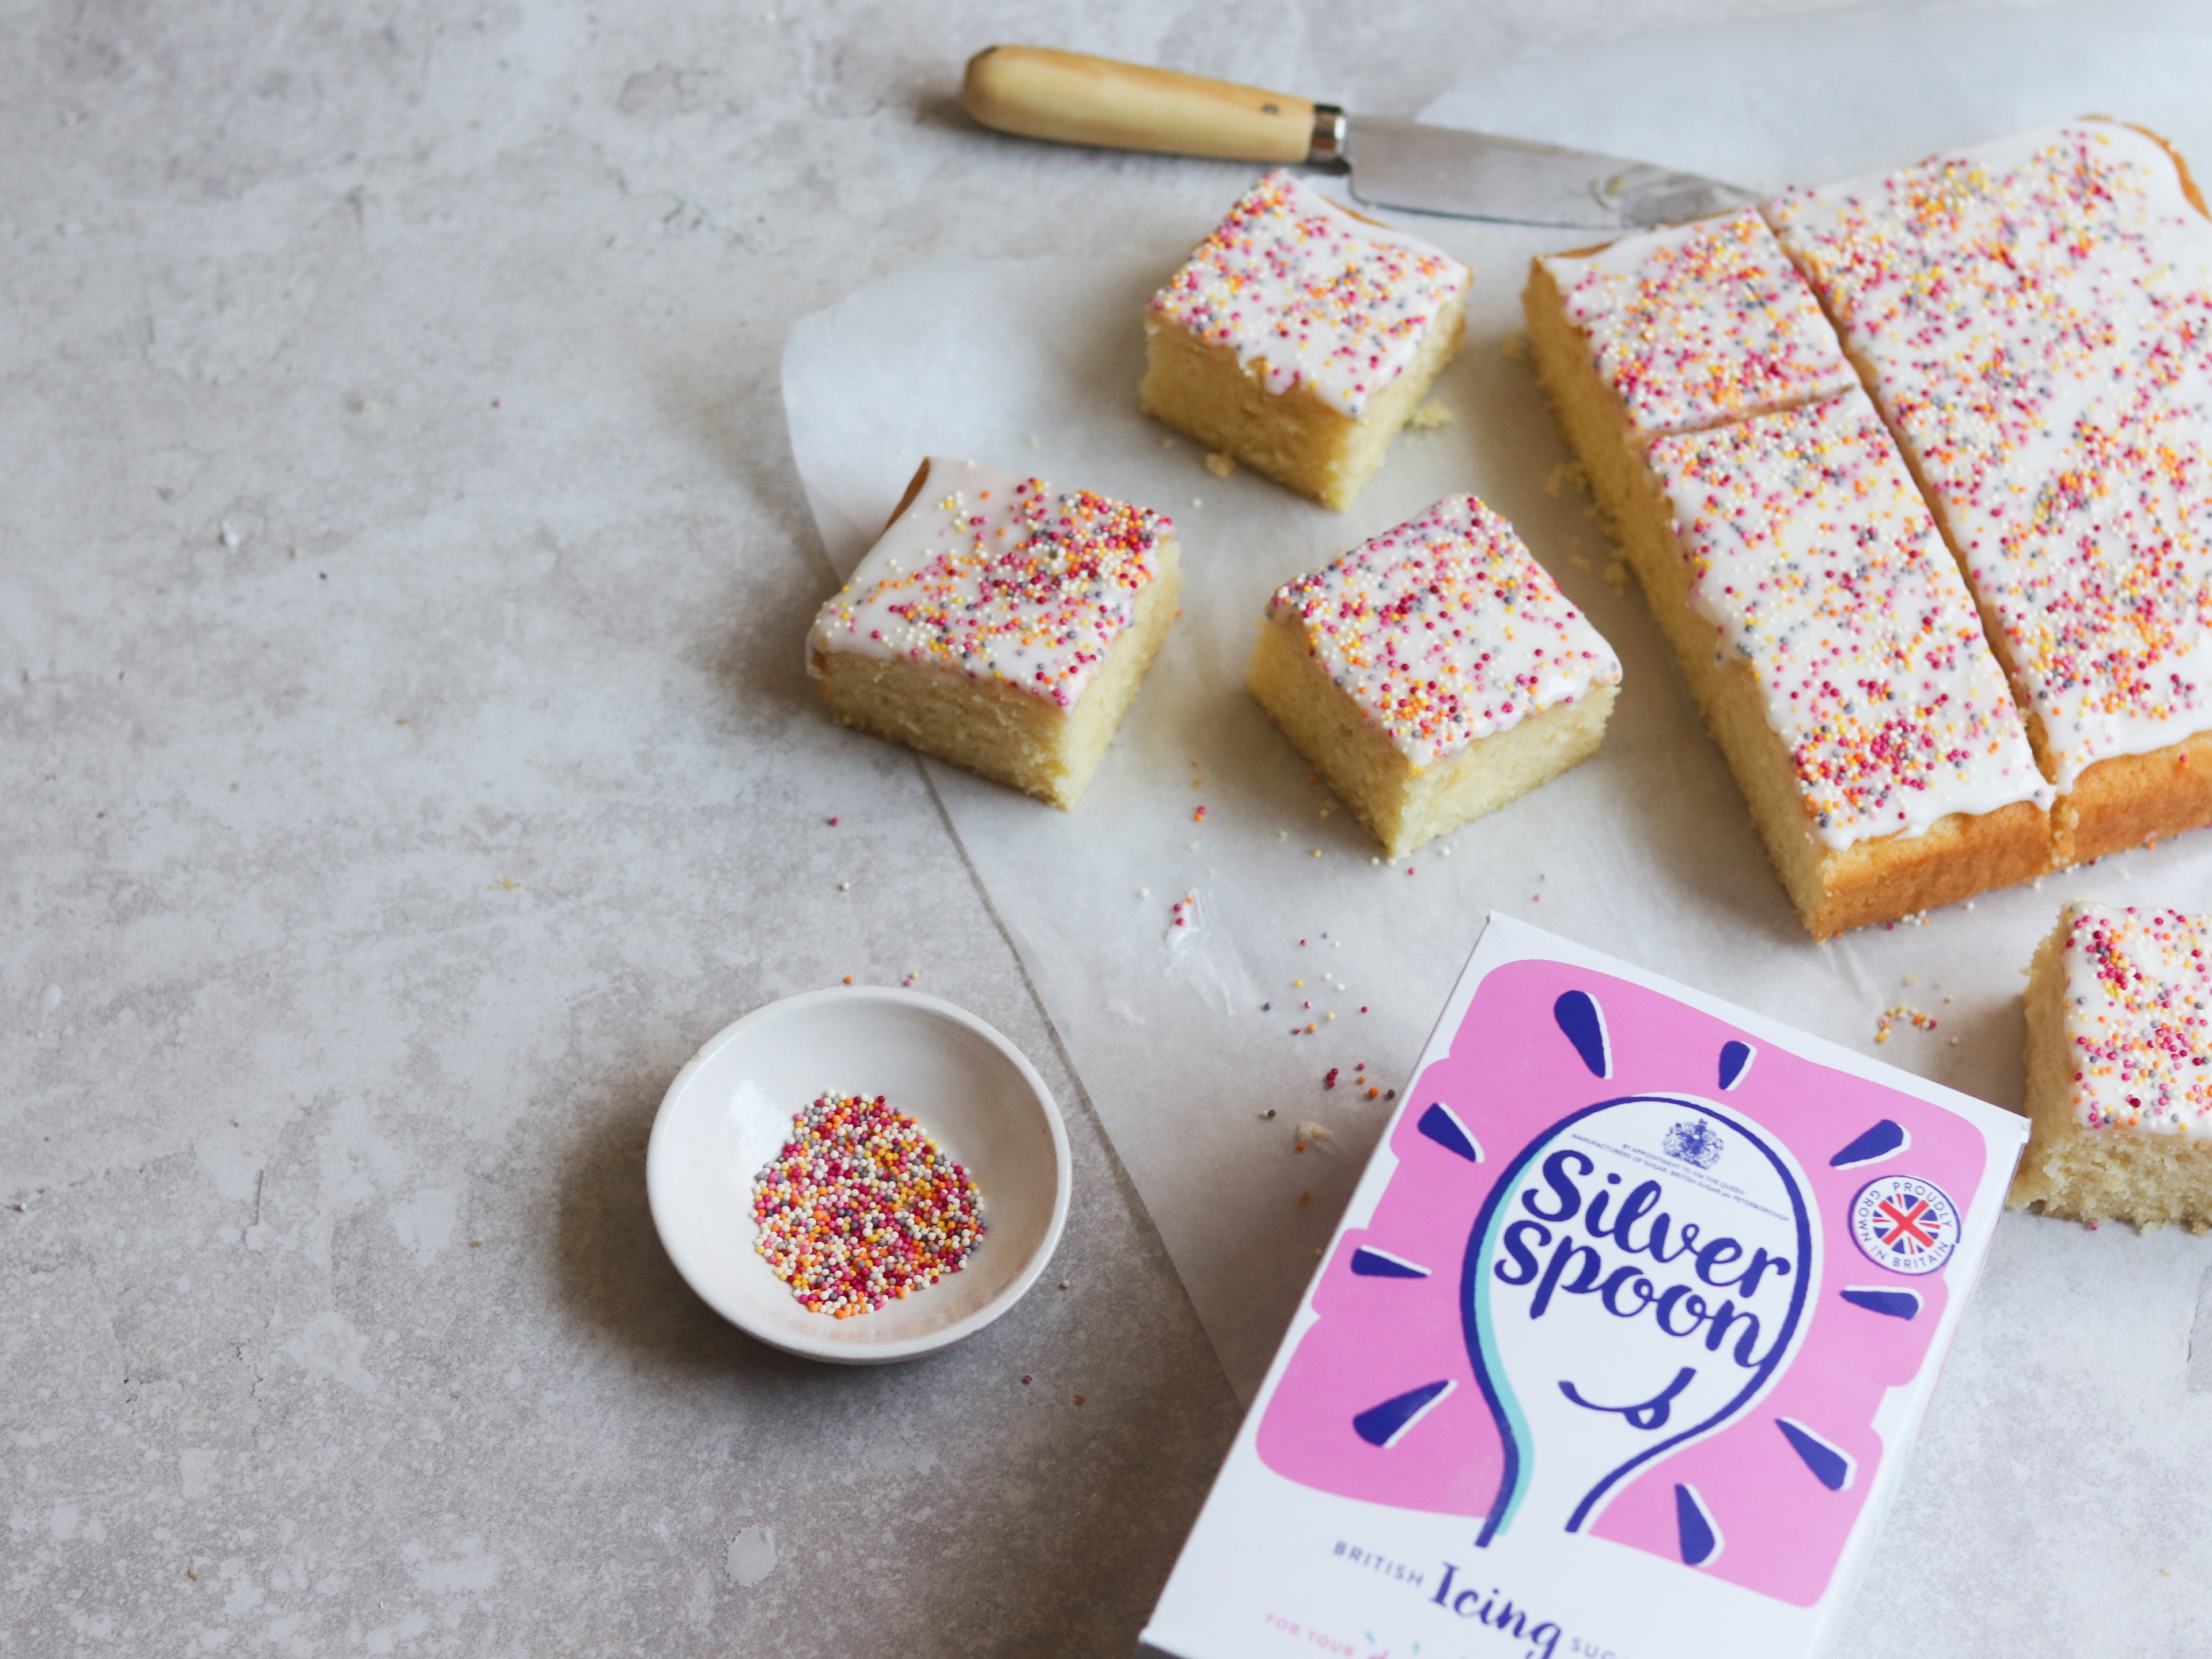 Sprinkle Cake from above view, on a sheet of baking paper, next to a box of Silver Spoon Icing Sugar and a bowl of sprinkles